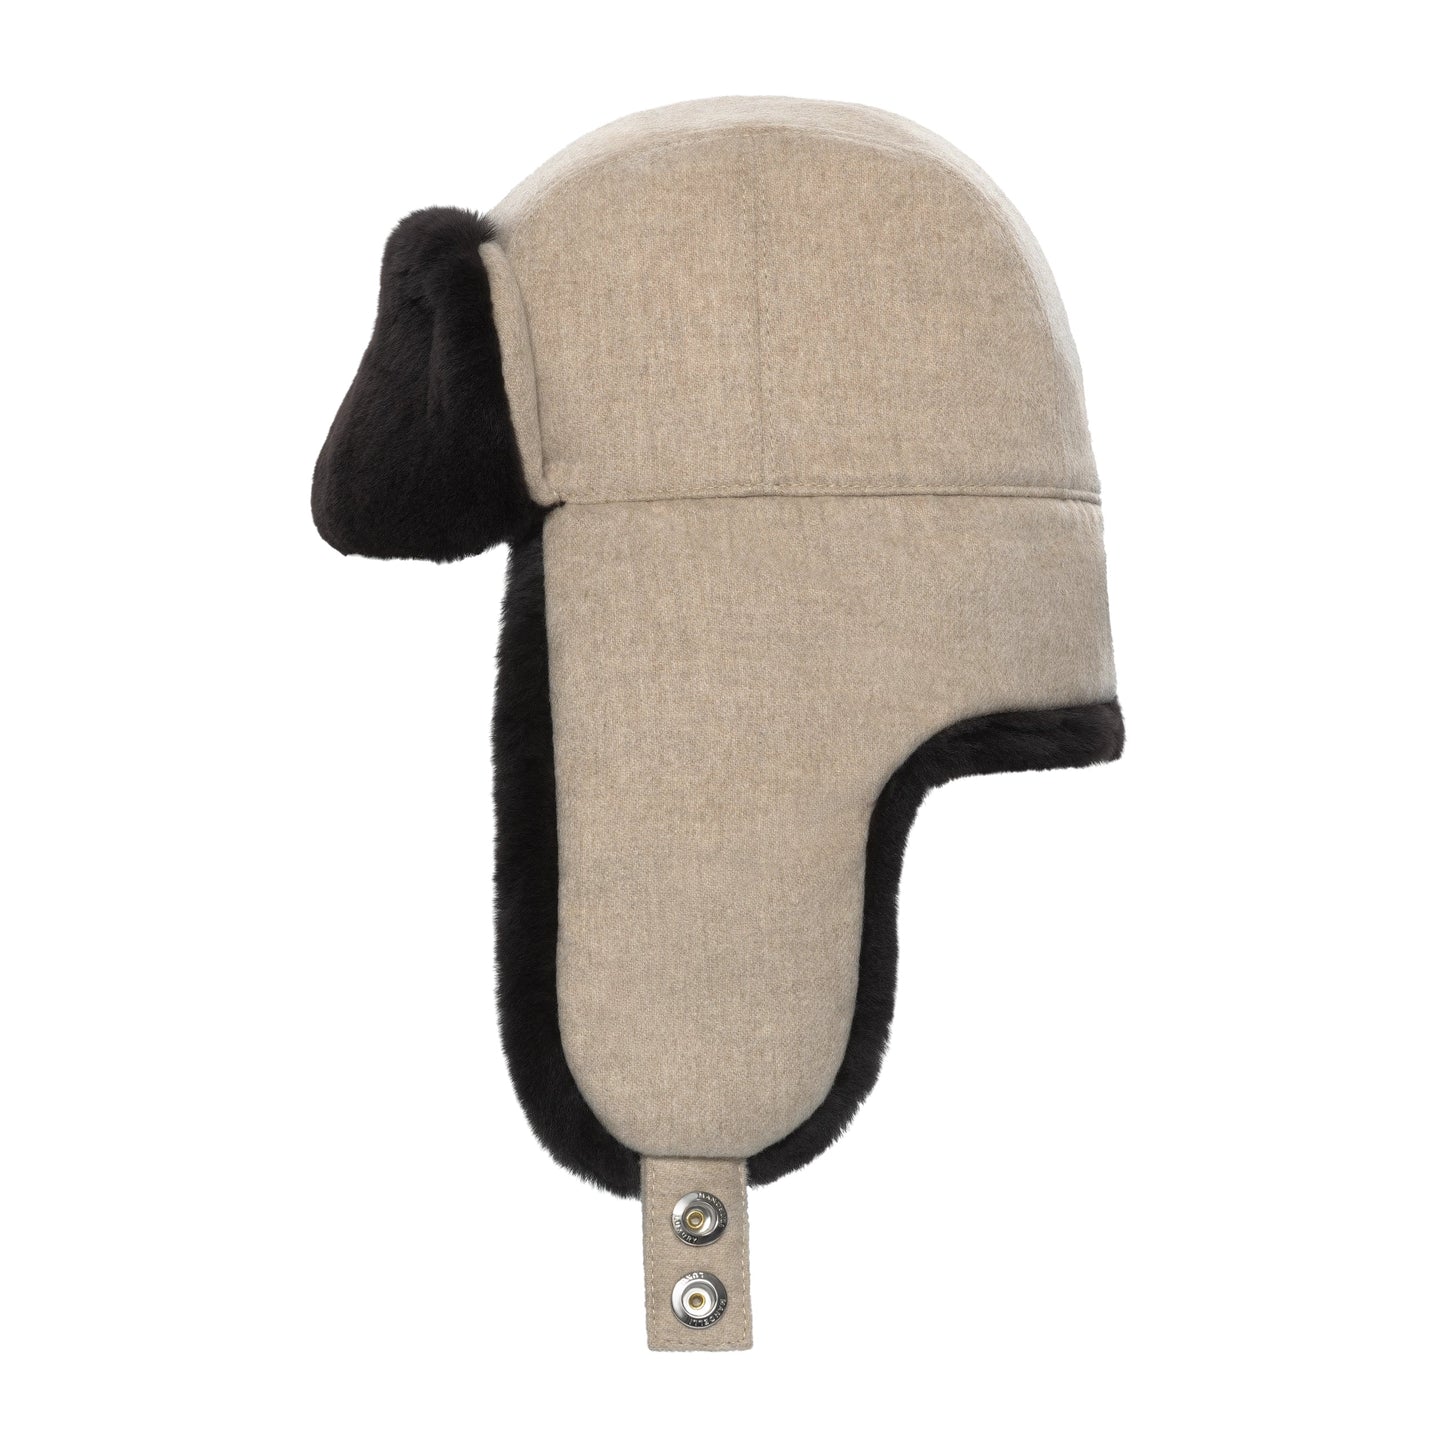 Mandelli Cashmere - Fur Hat with Ear Flaps in Beige and Black - SARTALE